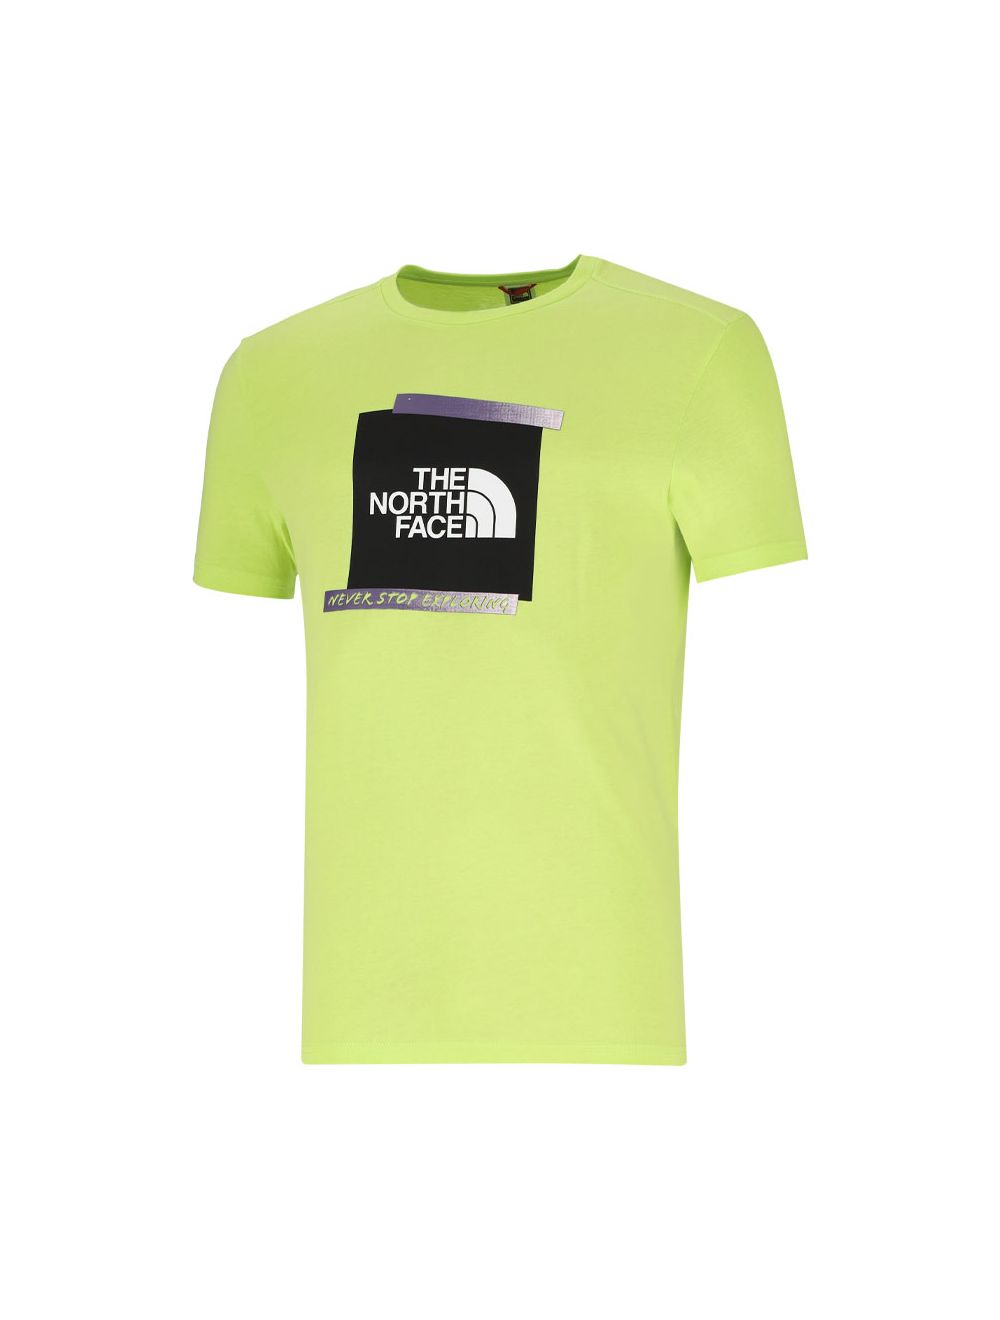 The North Face ES Graphic T-shirt Mens Yellow